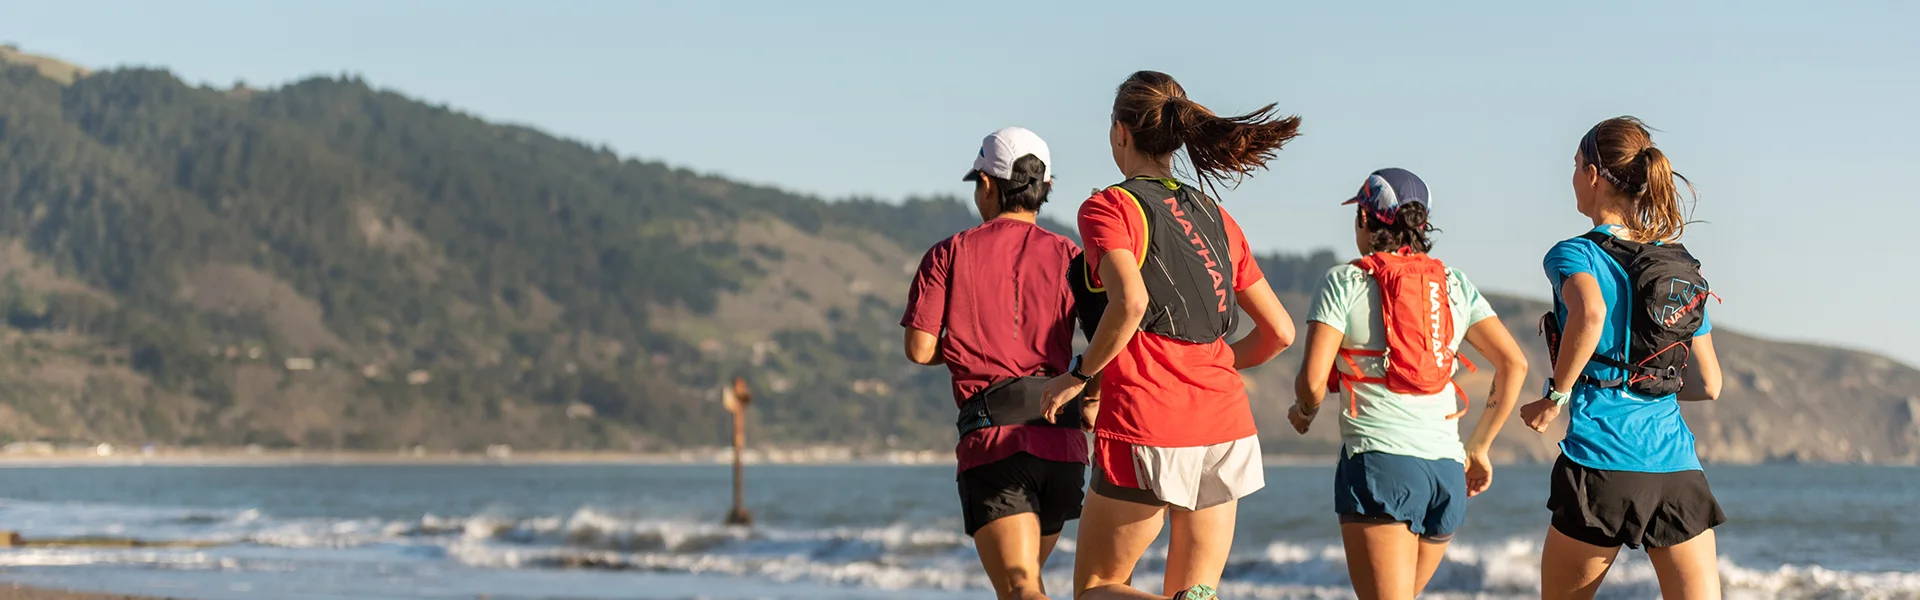 Group of runners wearing Nathan hydration packs and vests while running down the beach with waves rolling in